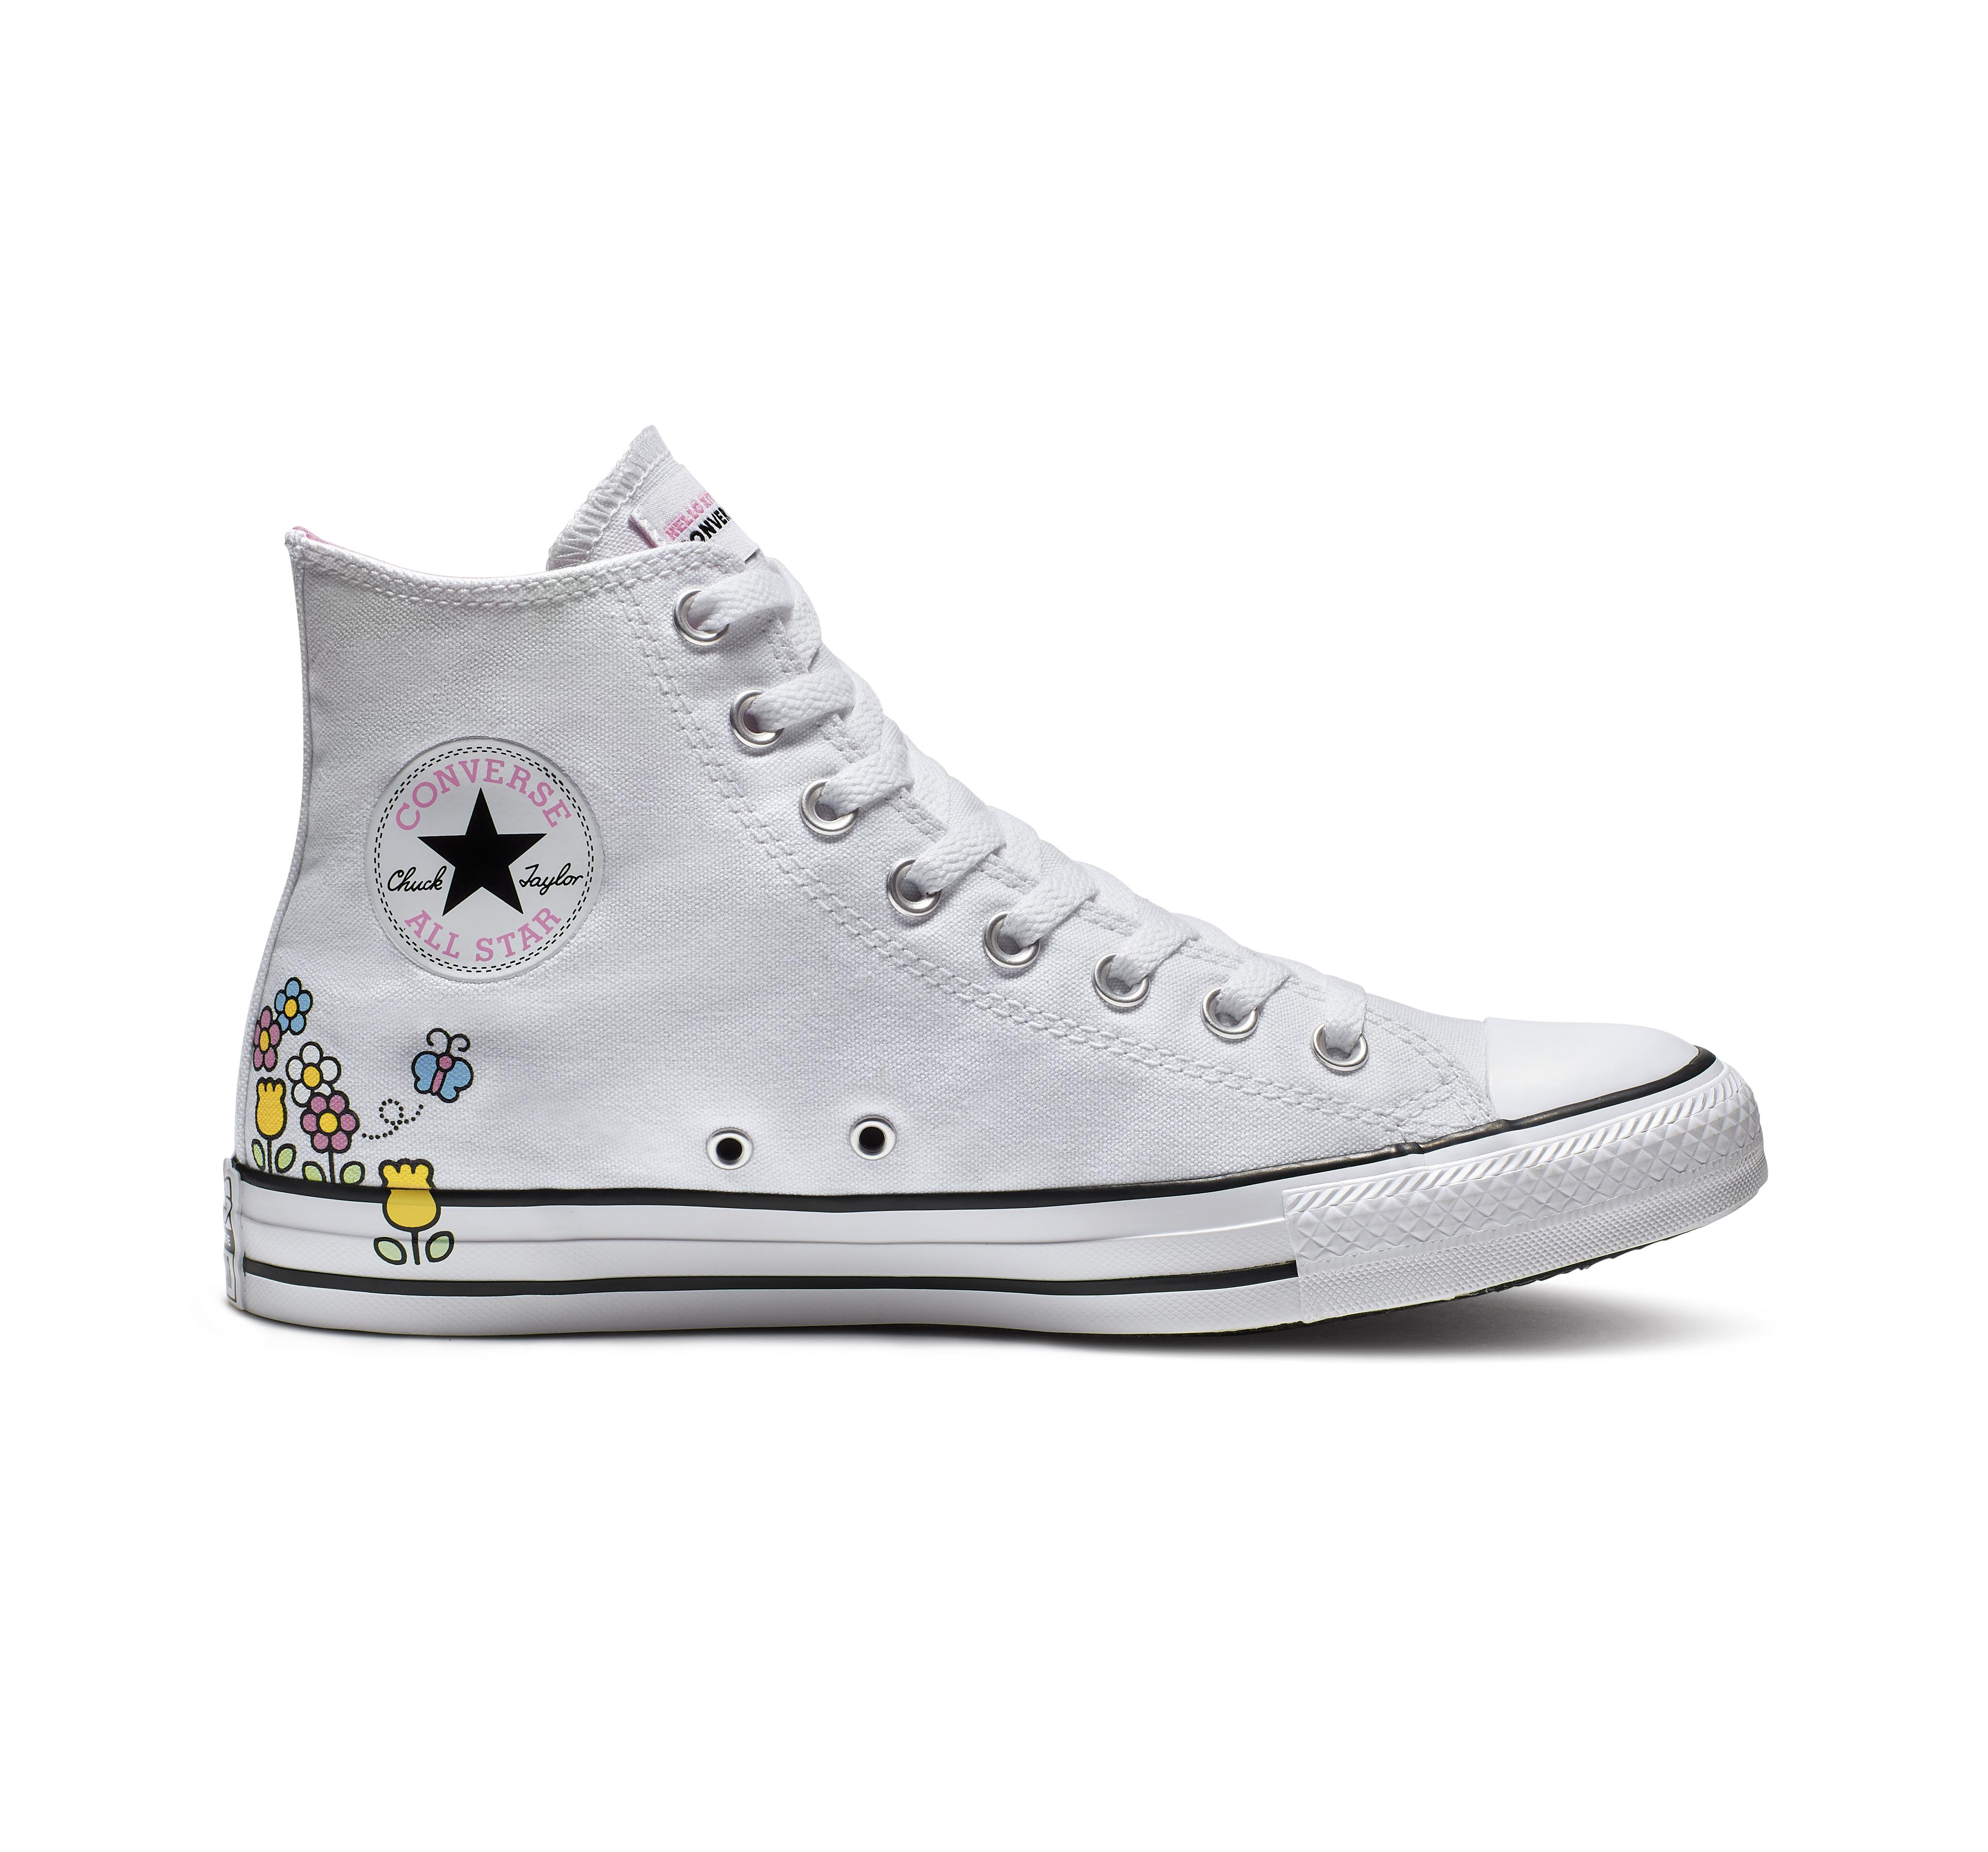 Converse X Hello Kitty Chuck Taylor All Star High Top in White - Lyst